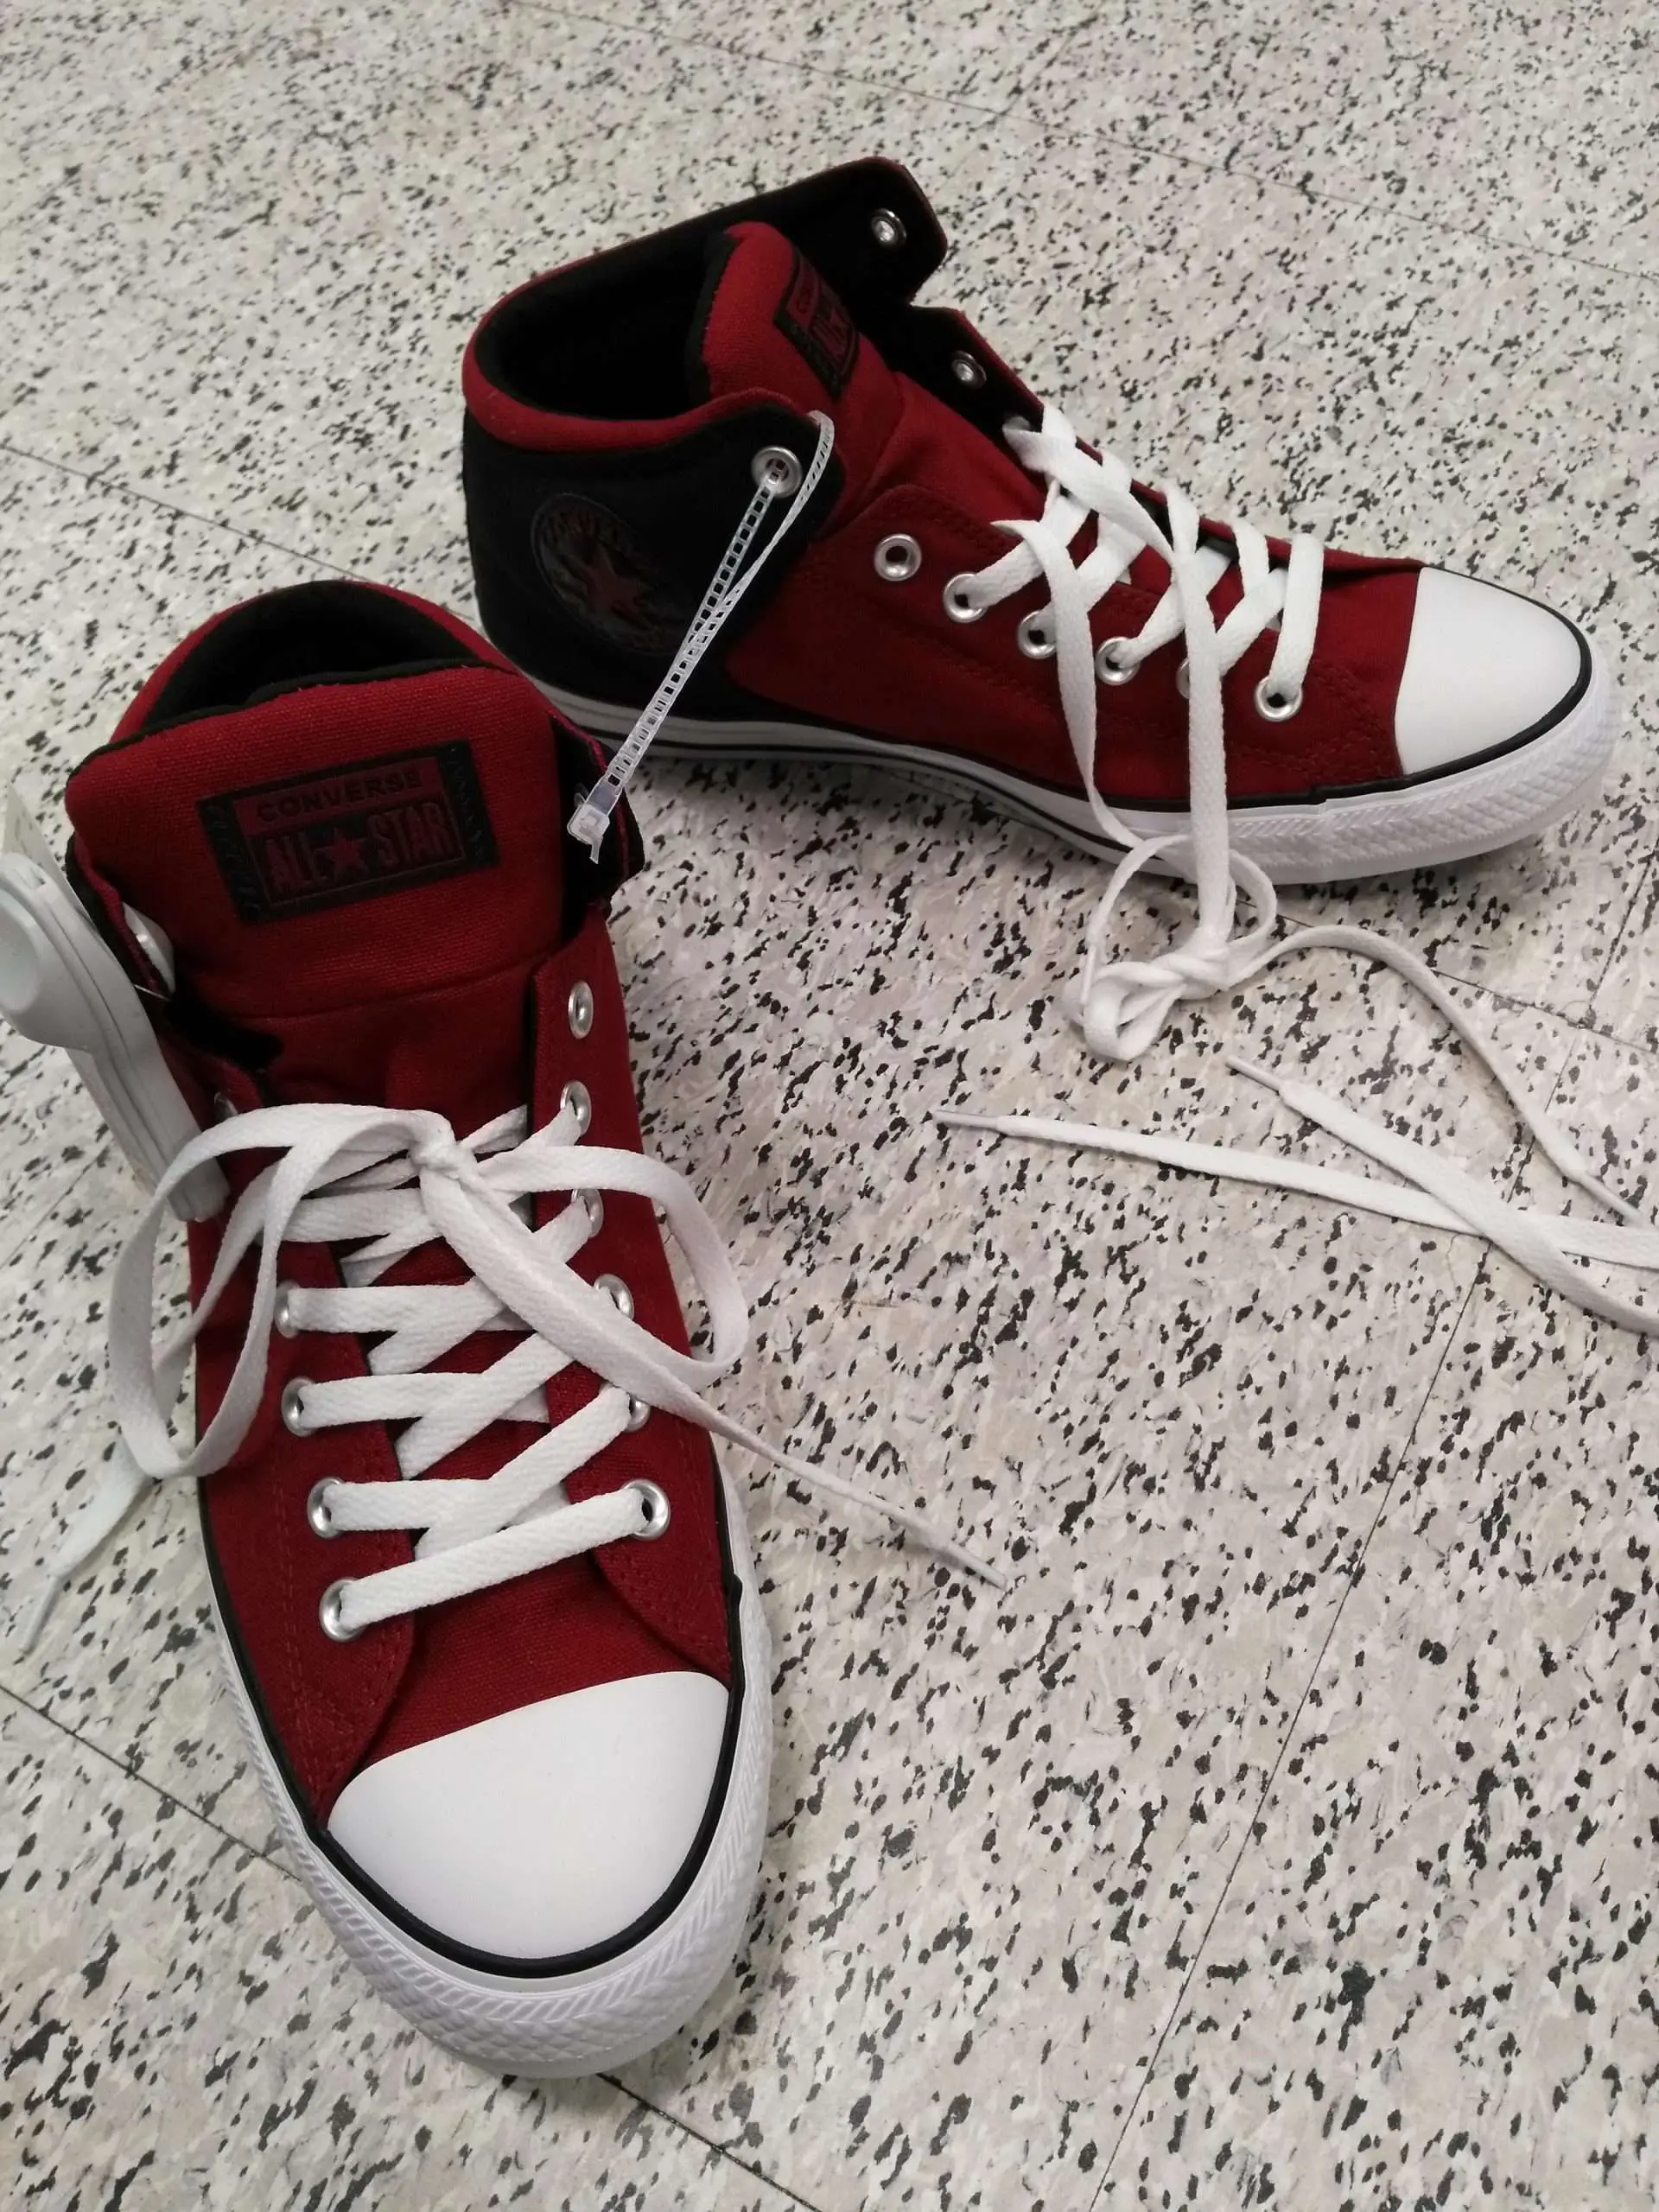 Do you guys know what type of Converse shoes these are? I ...